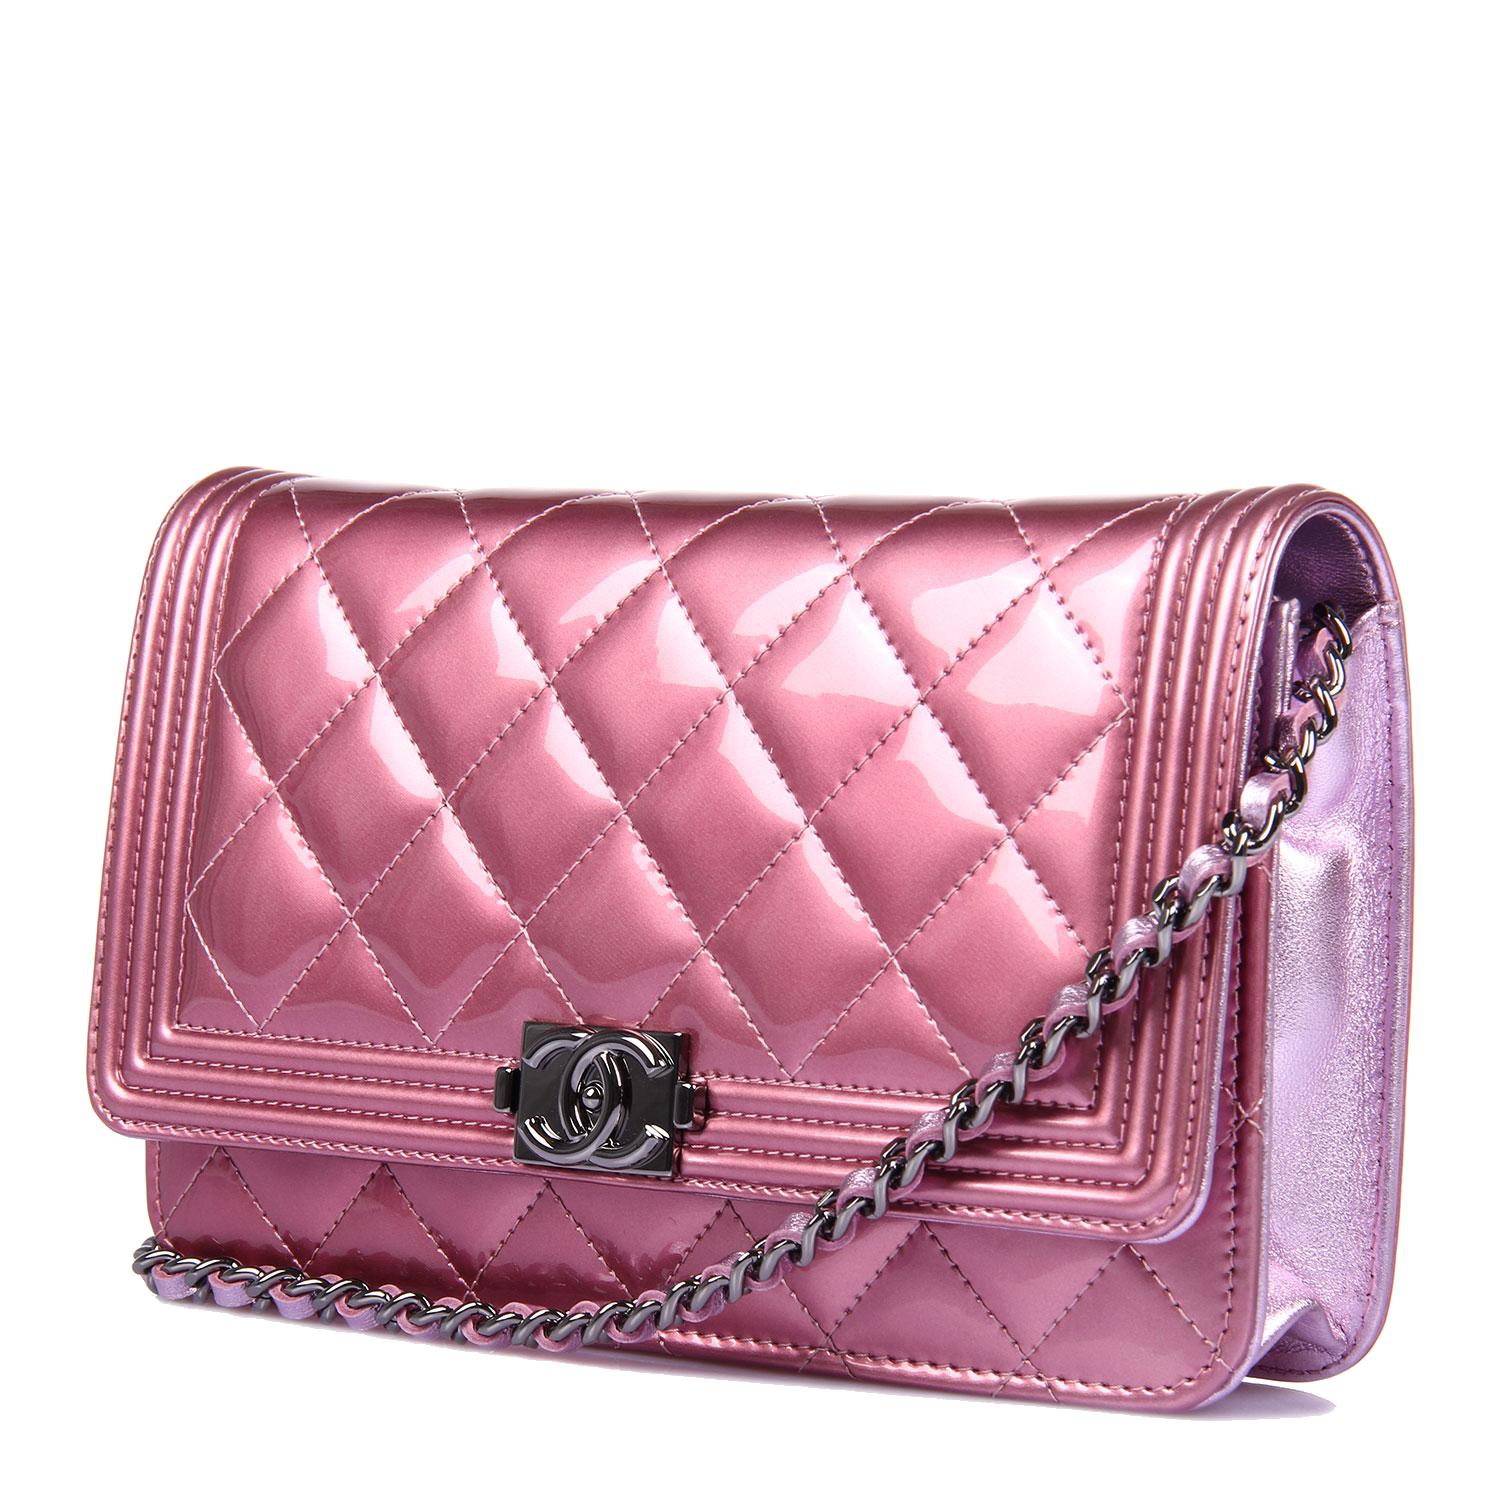 Handbag Chanel Leather Luxury, luxe transparent background PNG